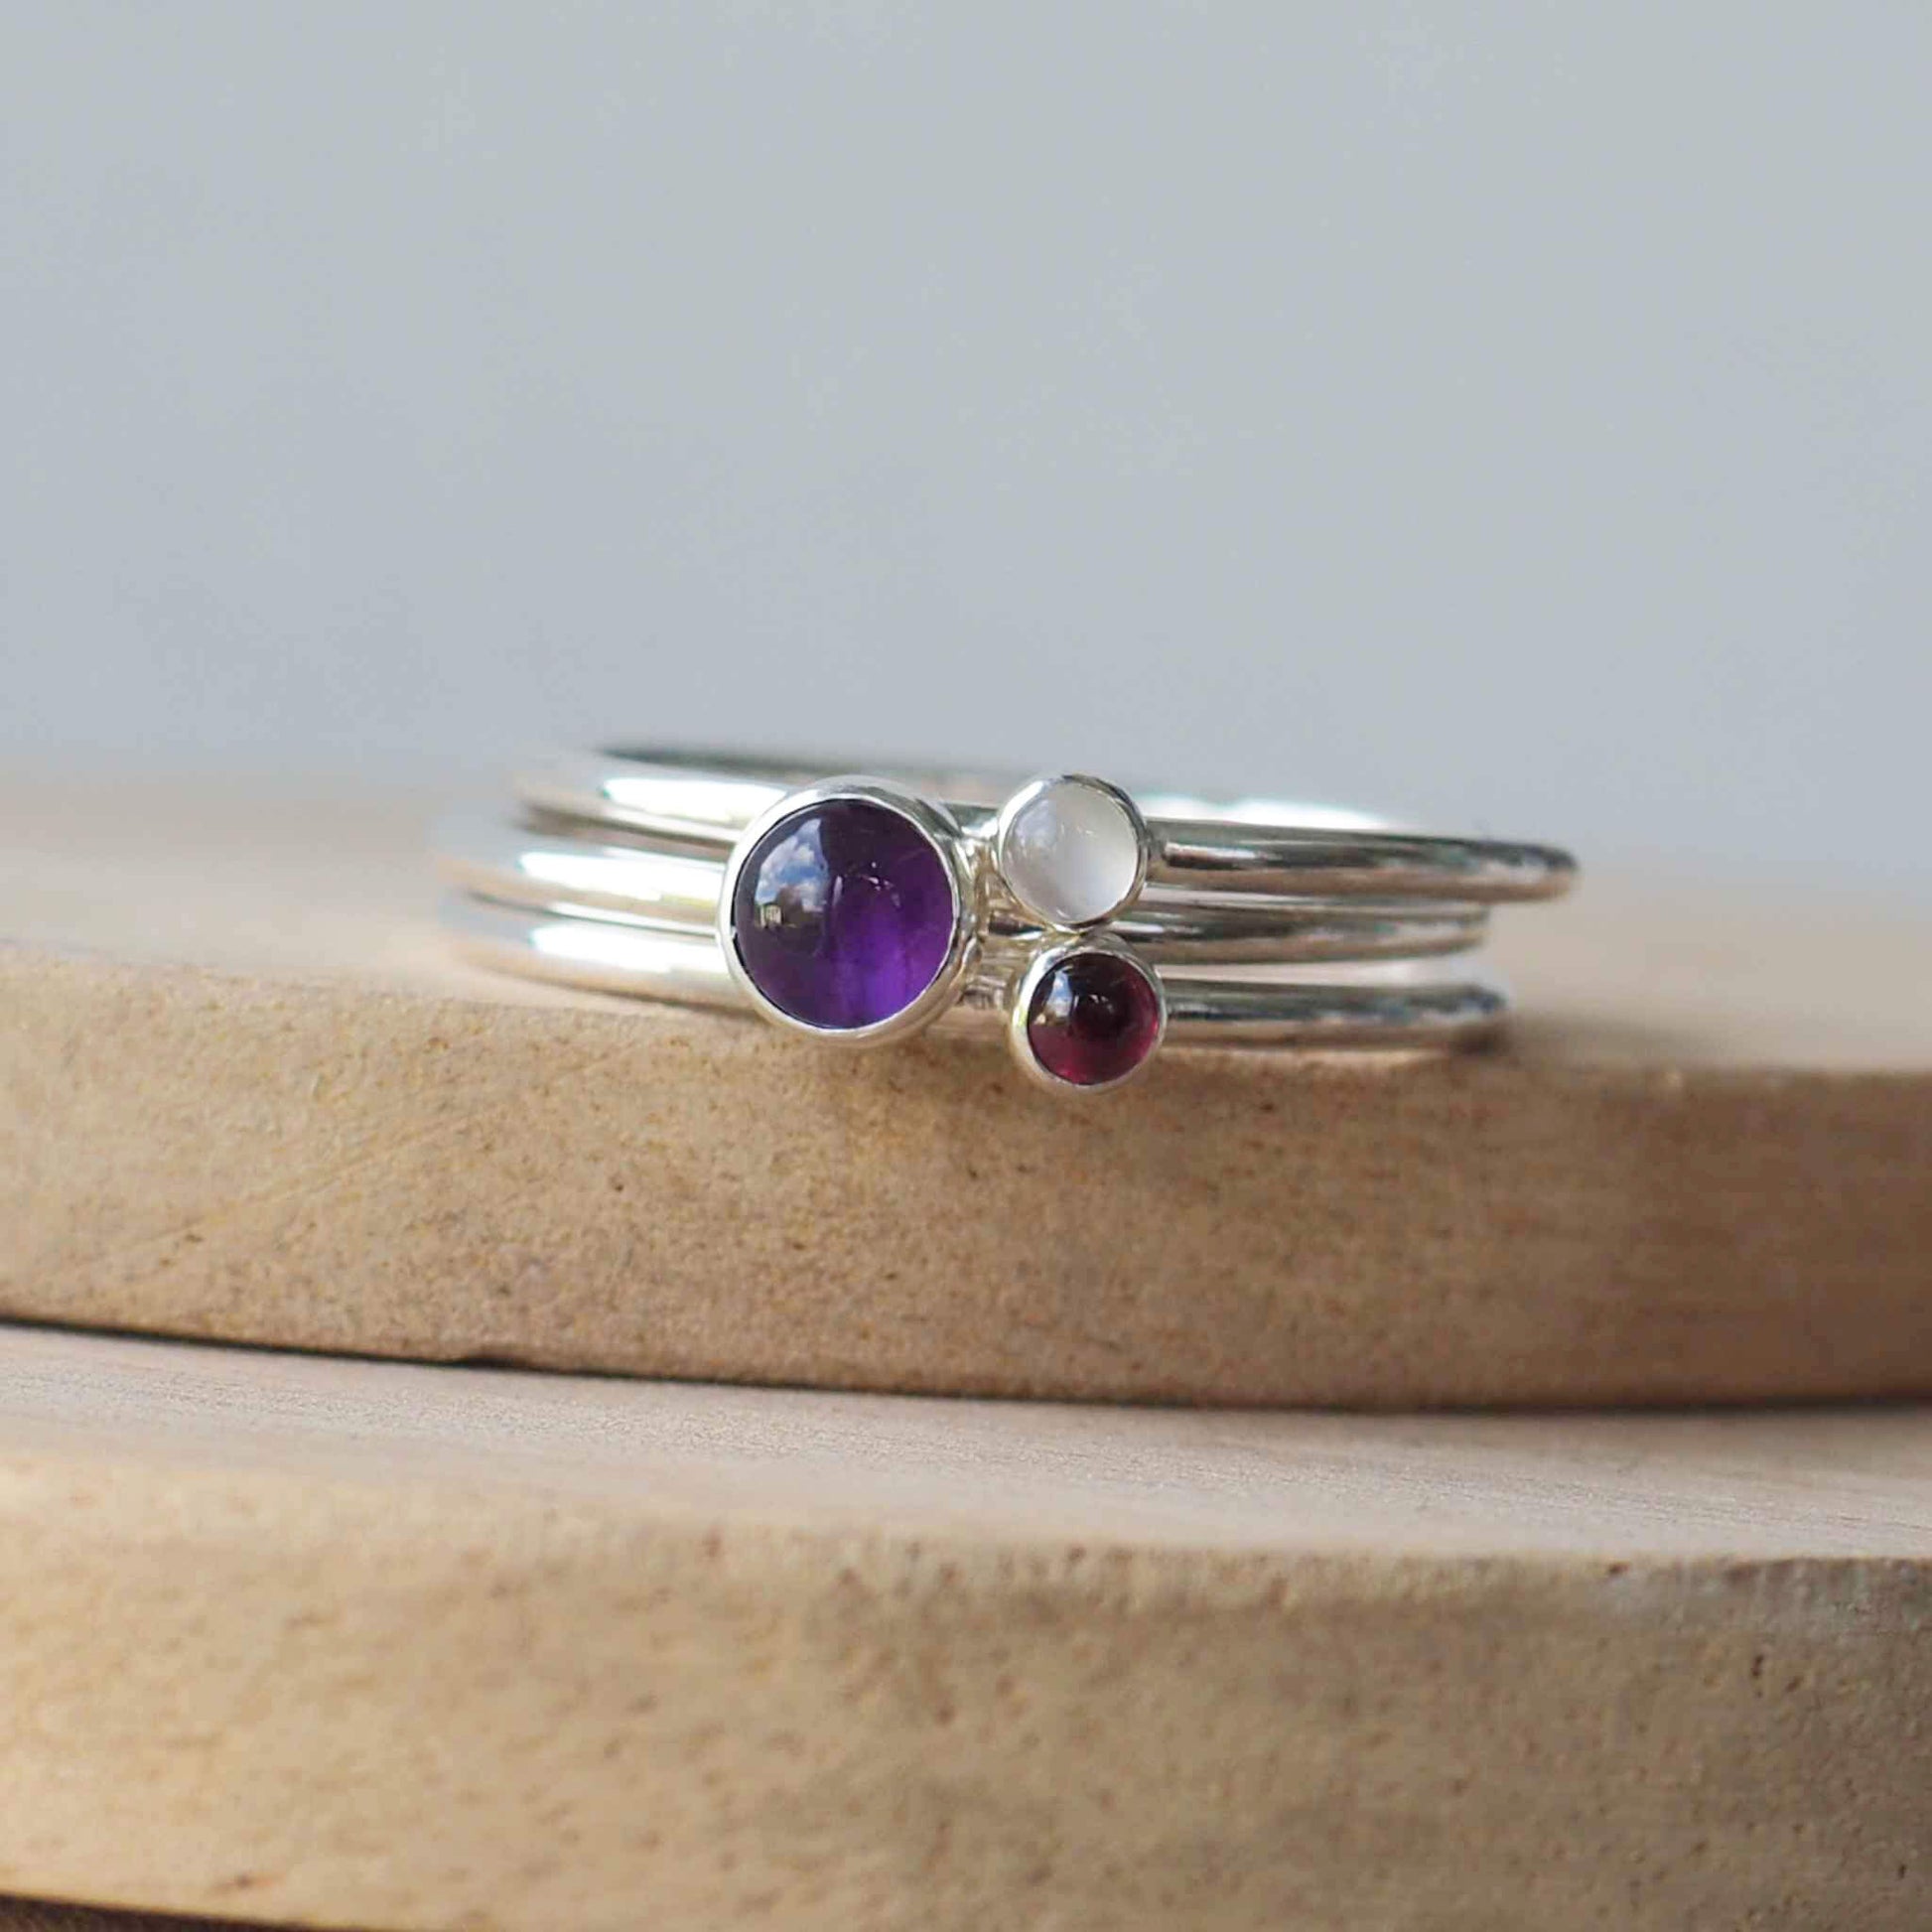 Three ring birthstone ring set made from sterling silver and three gemstones. This set has Amethyst, Garnet and Moonstone. Handmade in Scotland by Maram Jewellery